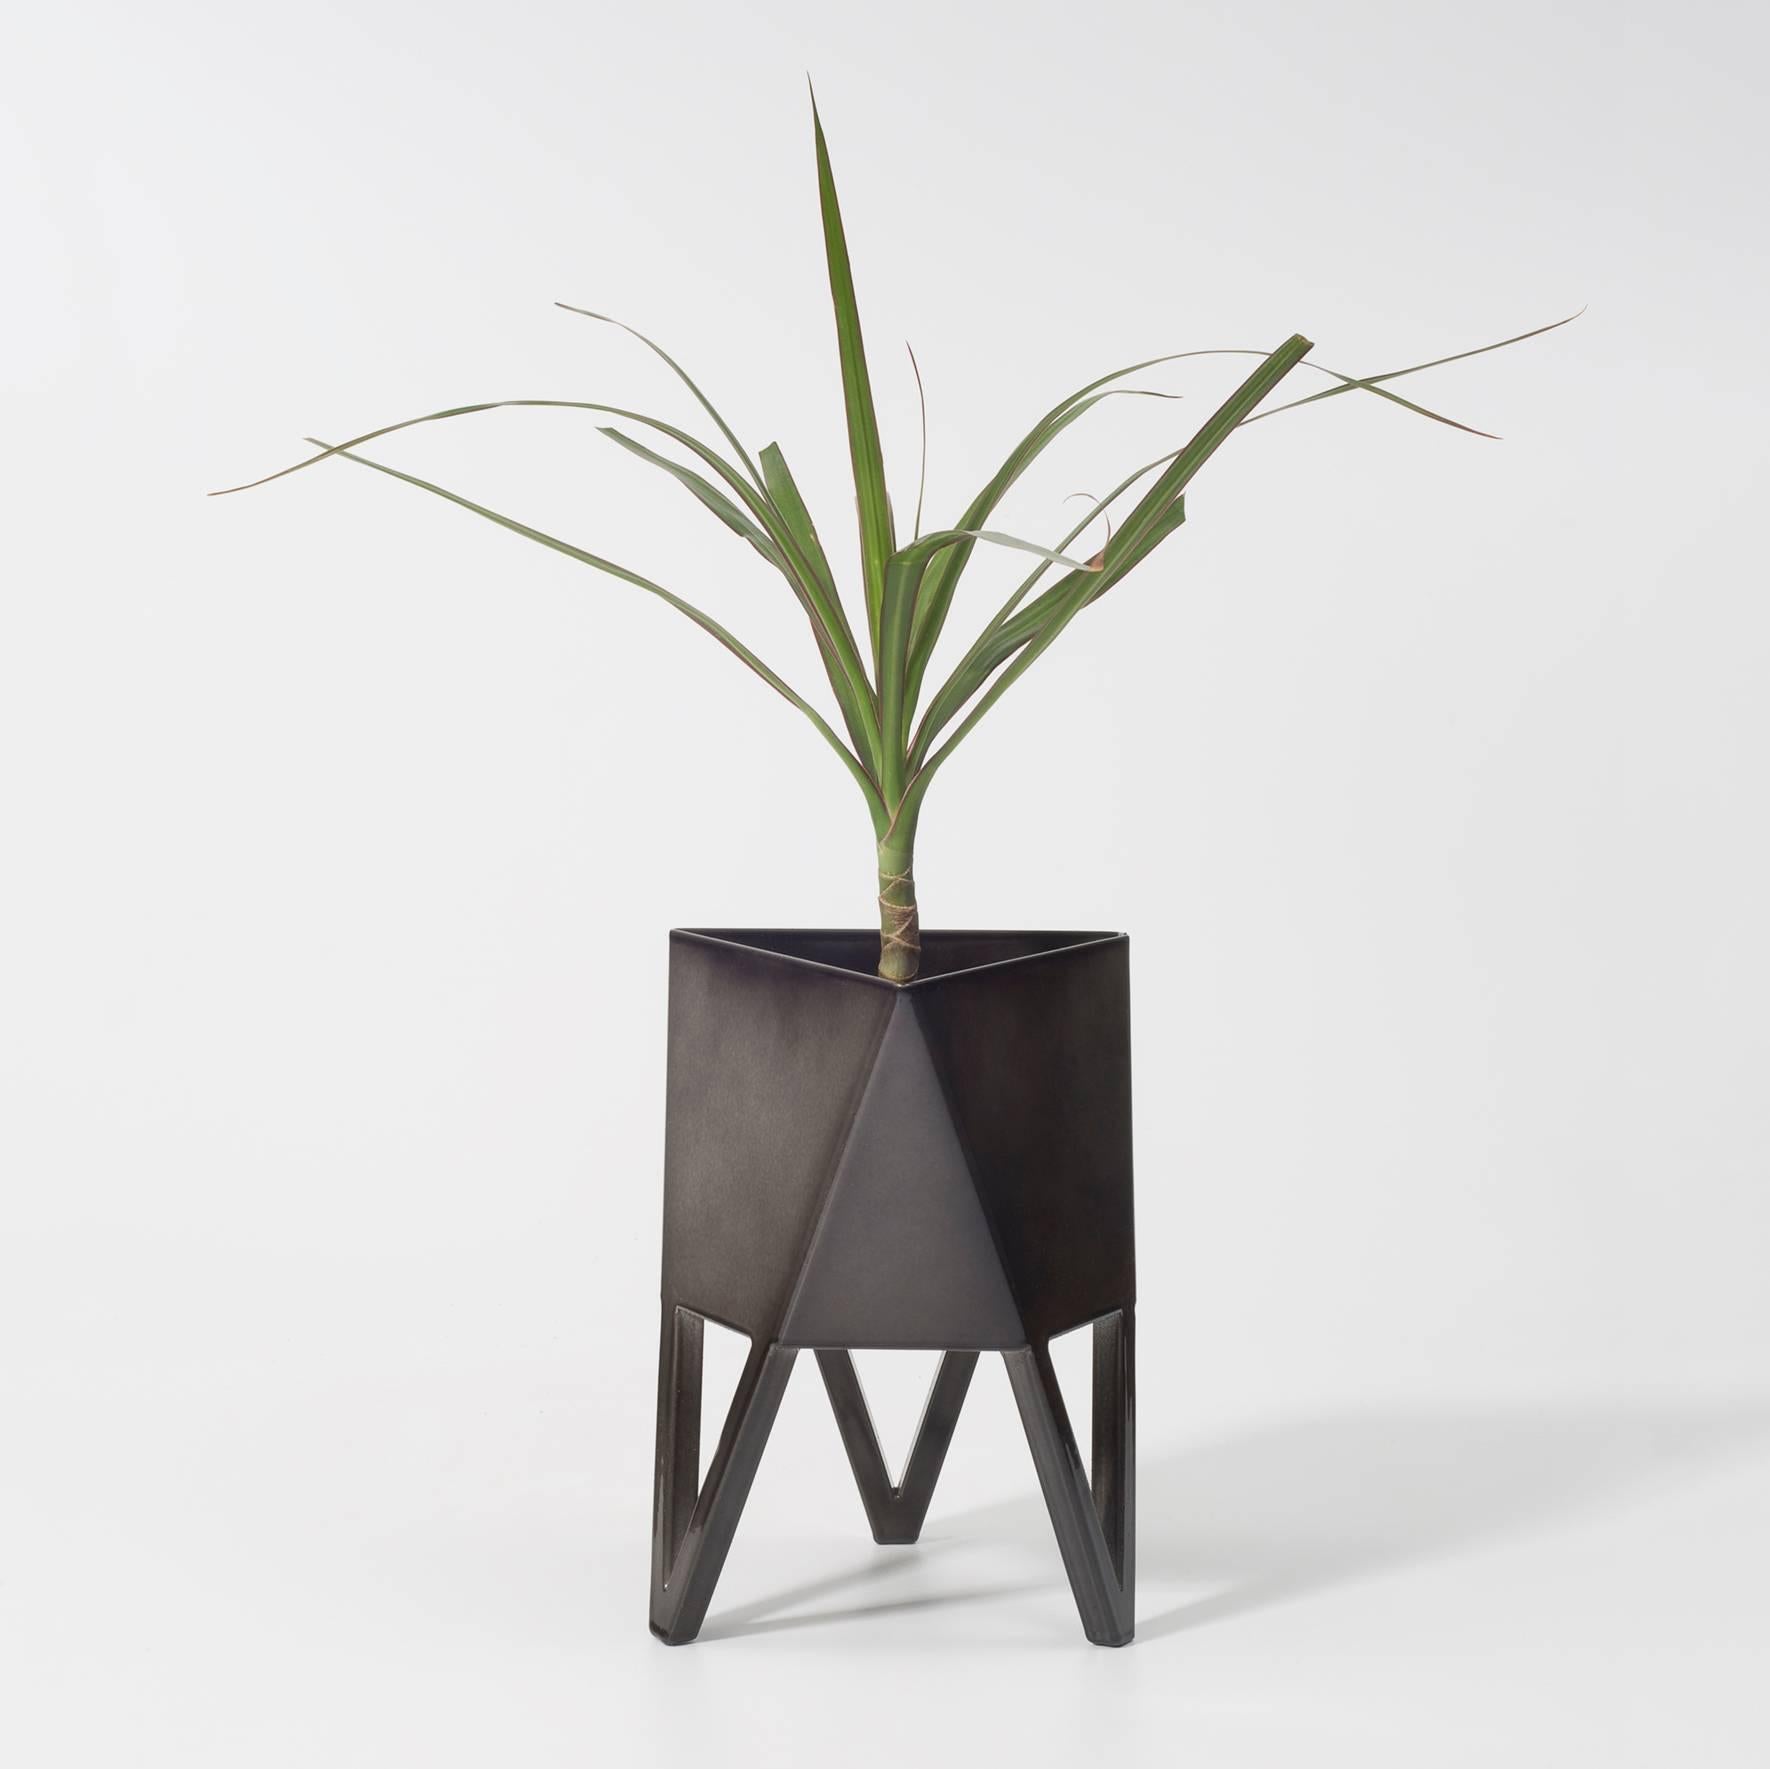 Contemporary Mini Deca Planter, Yellow, Steel, Powder Coated, Indoor/Outdoor by Force/Collide